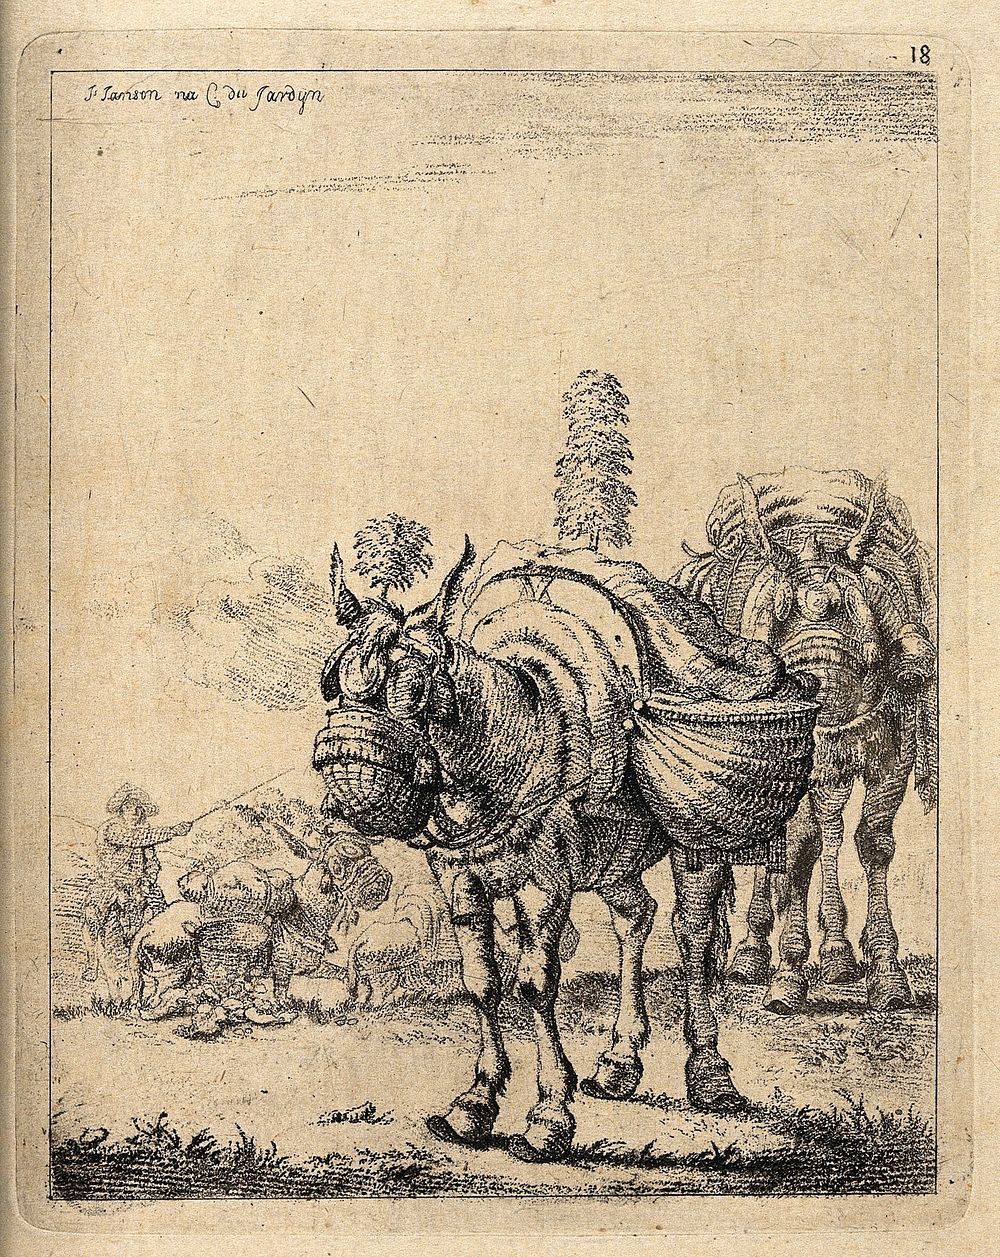 A procession of travelling donkeys with saddle-bags and nose-bags. Lithograph after J. Janson, the elder.